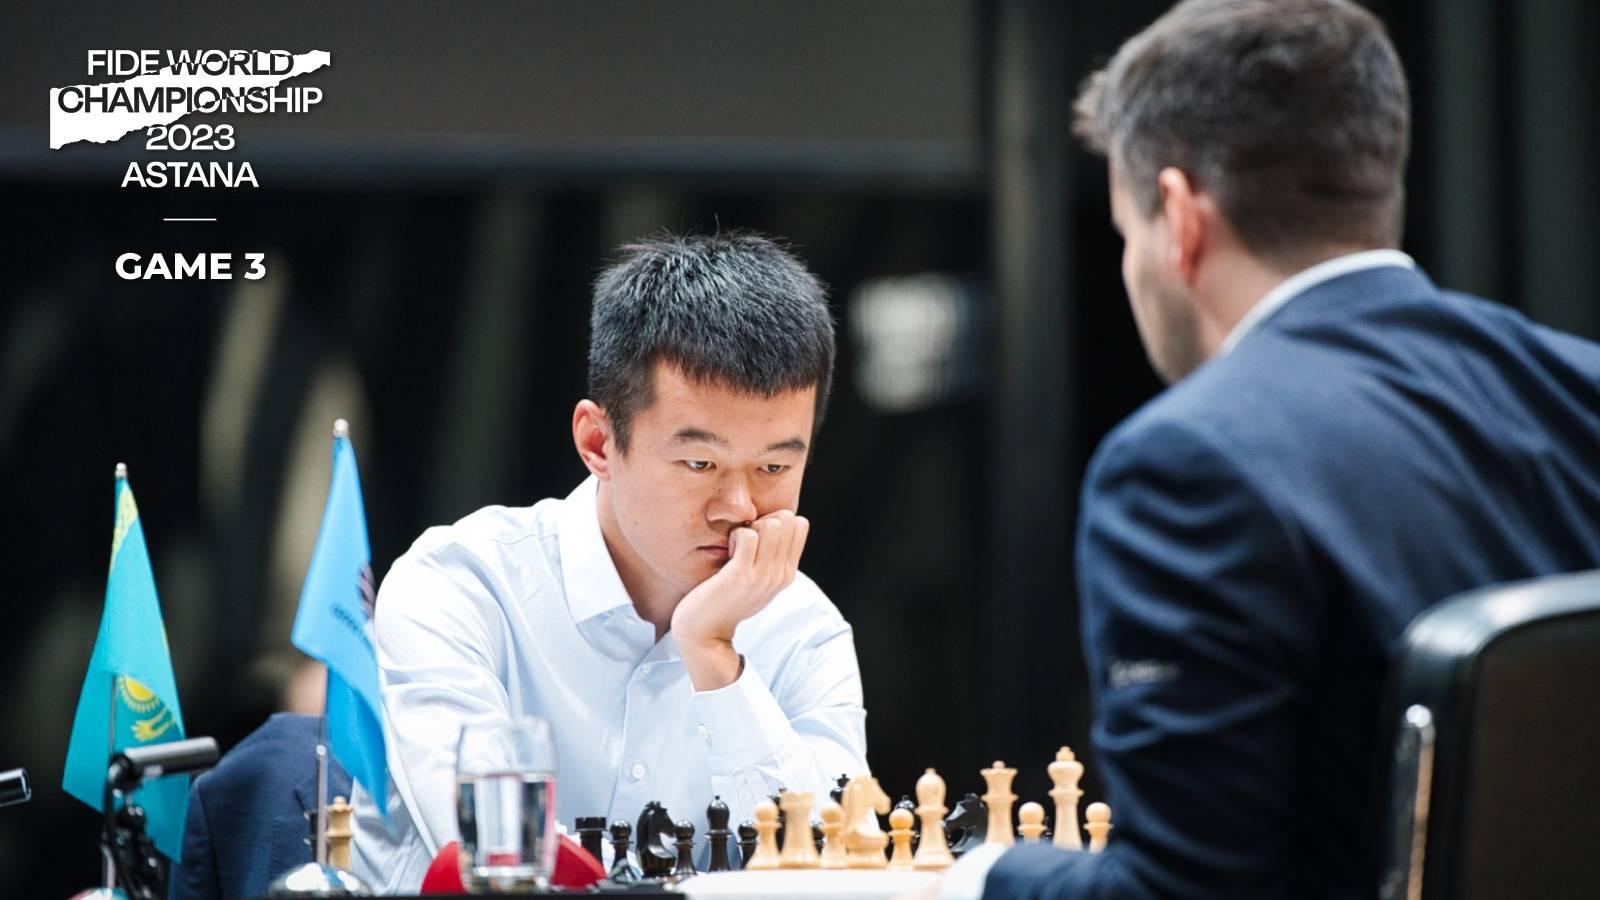 Flash Report: Ding Holds Nepomniachtchi To Draw In Game 3